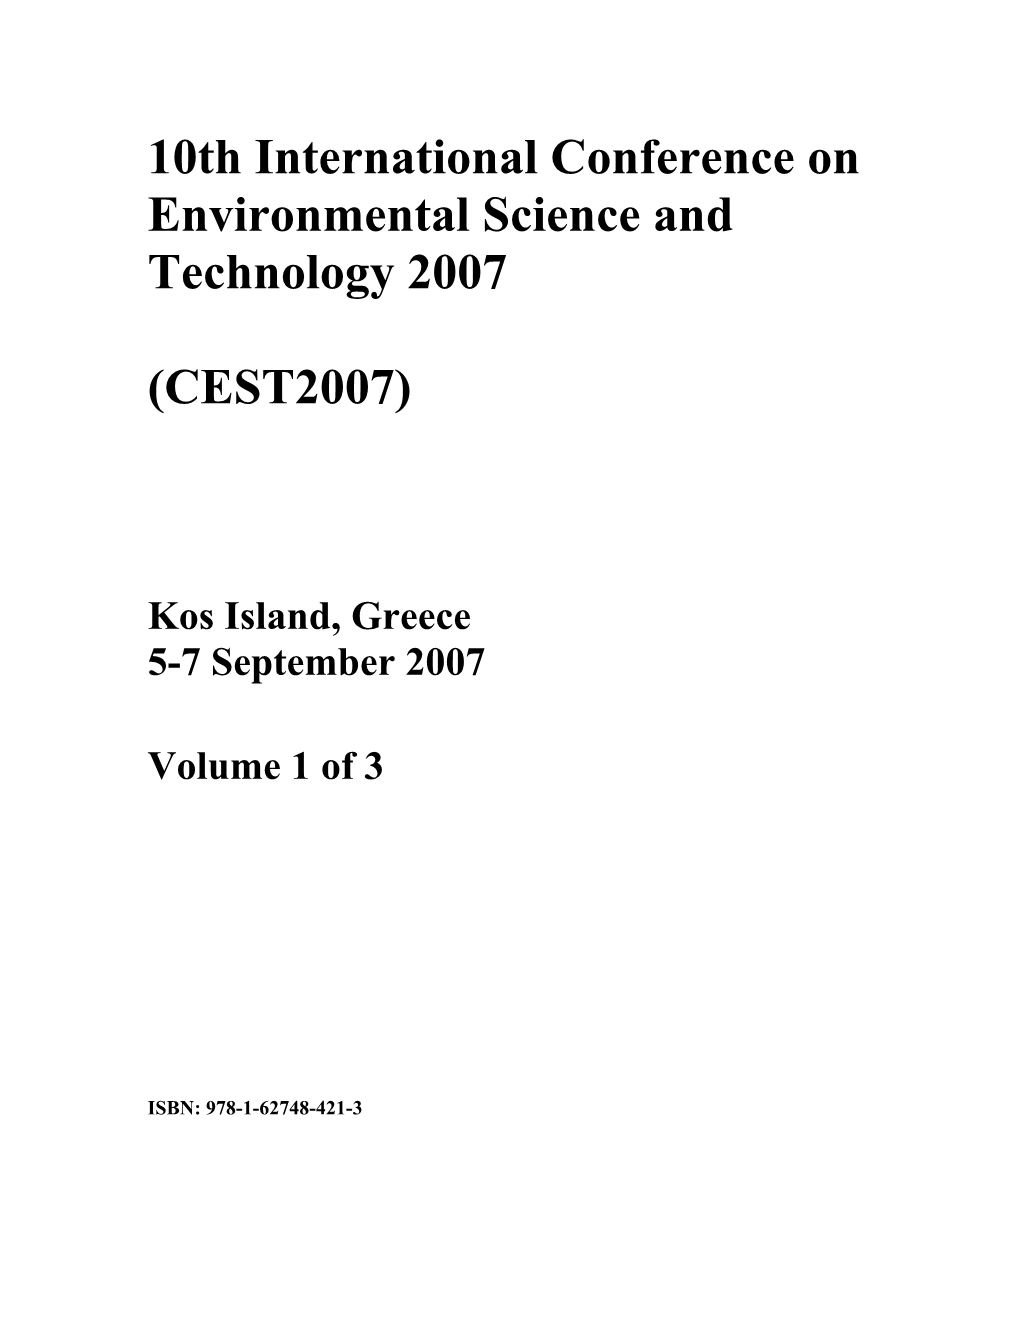 10Th International Conference on Environmental Science and Technology 2007